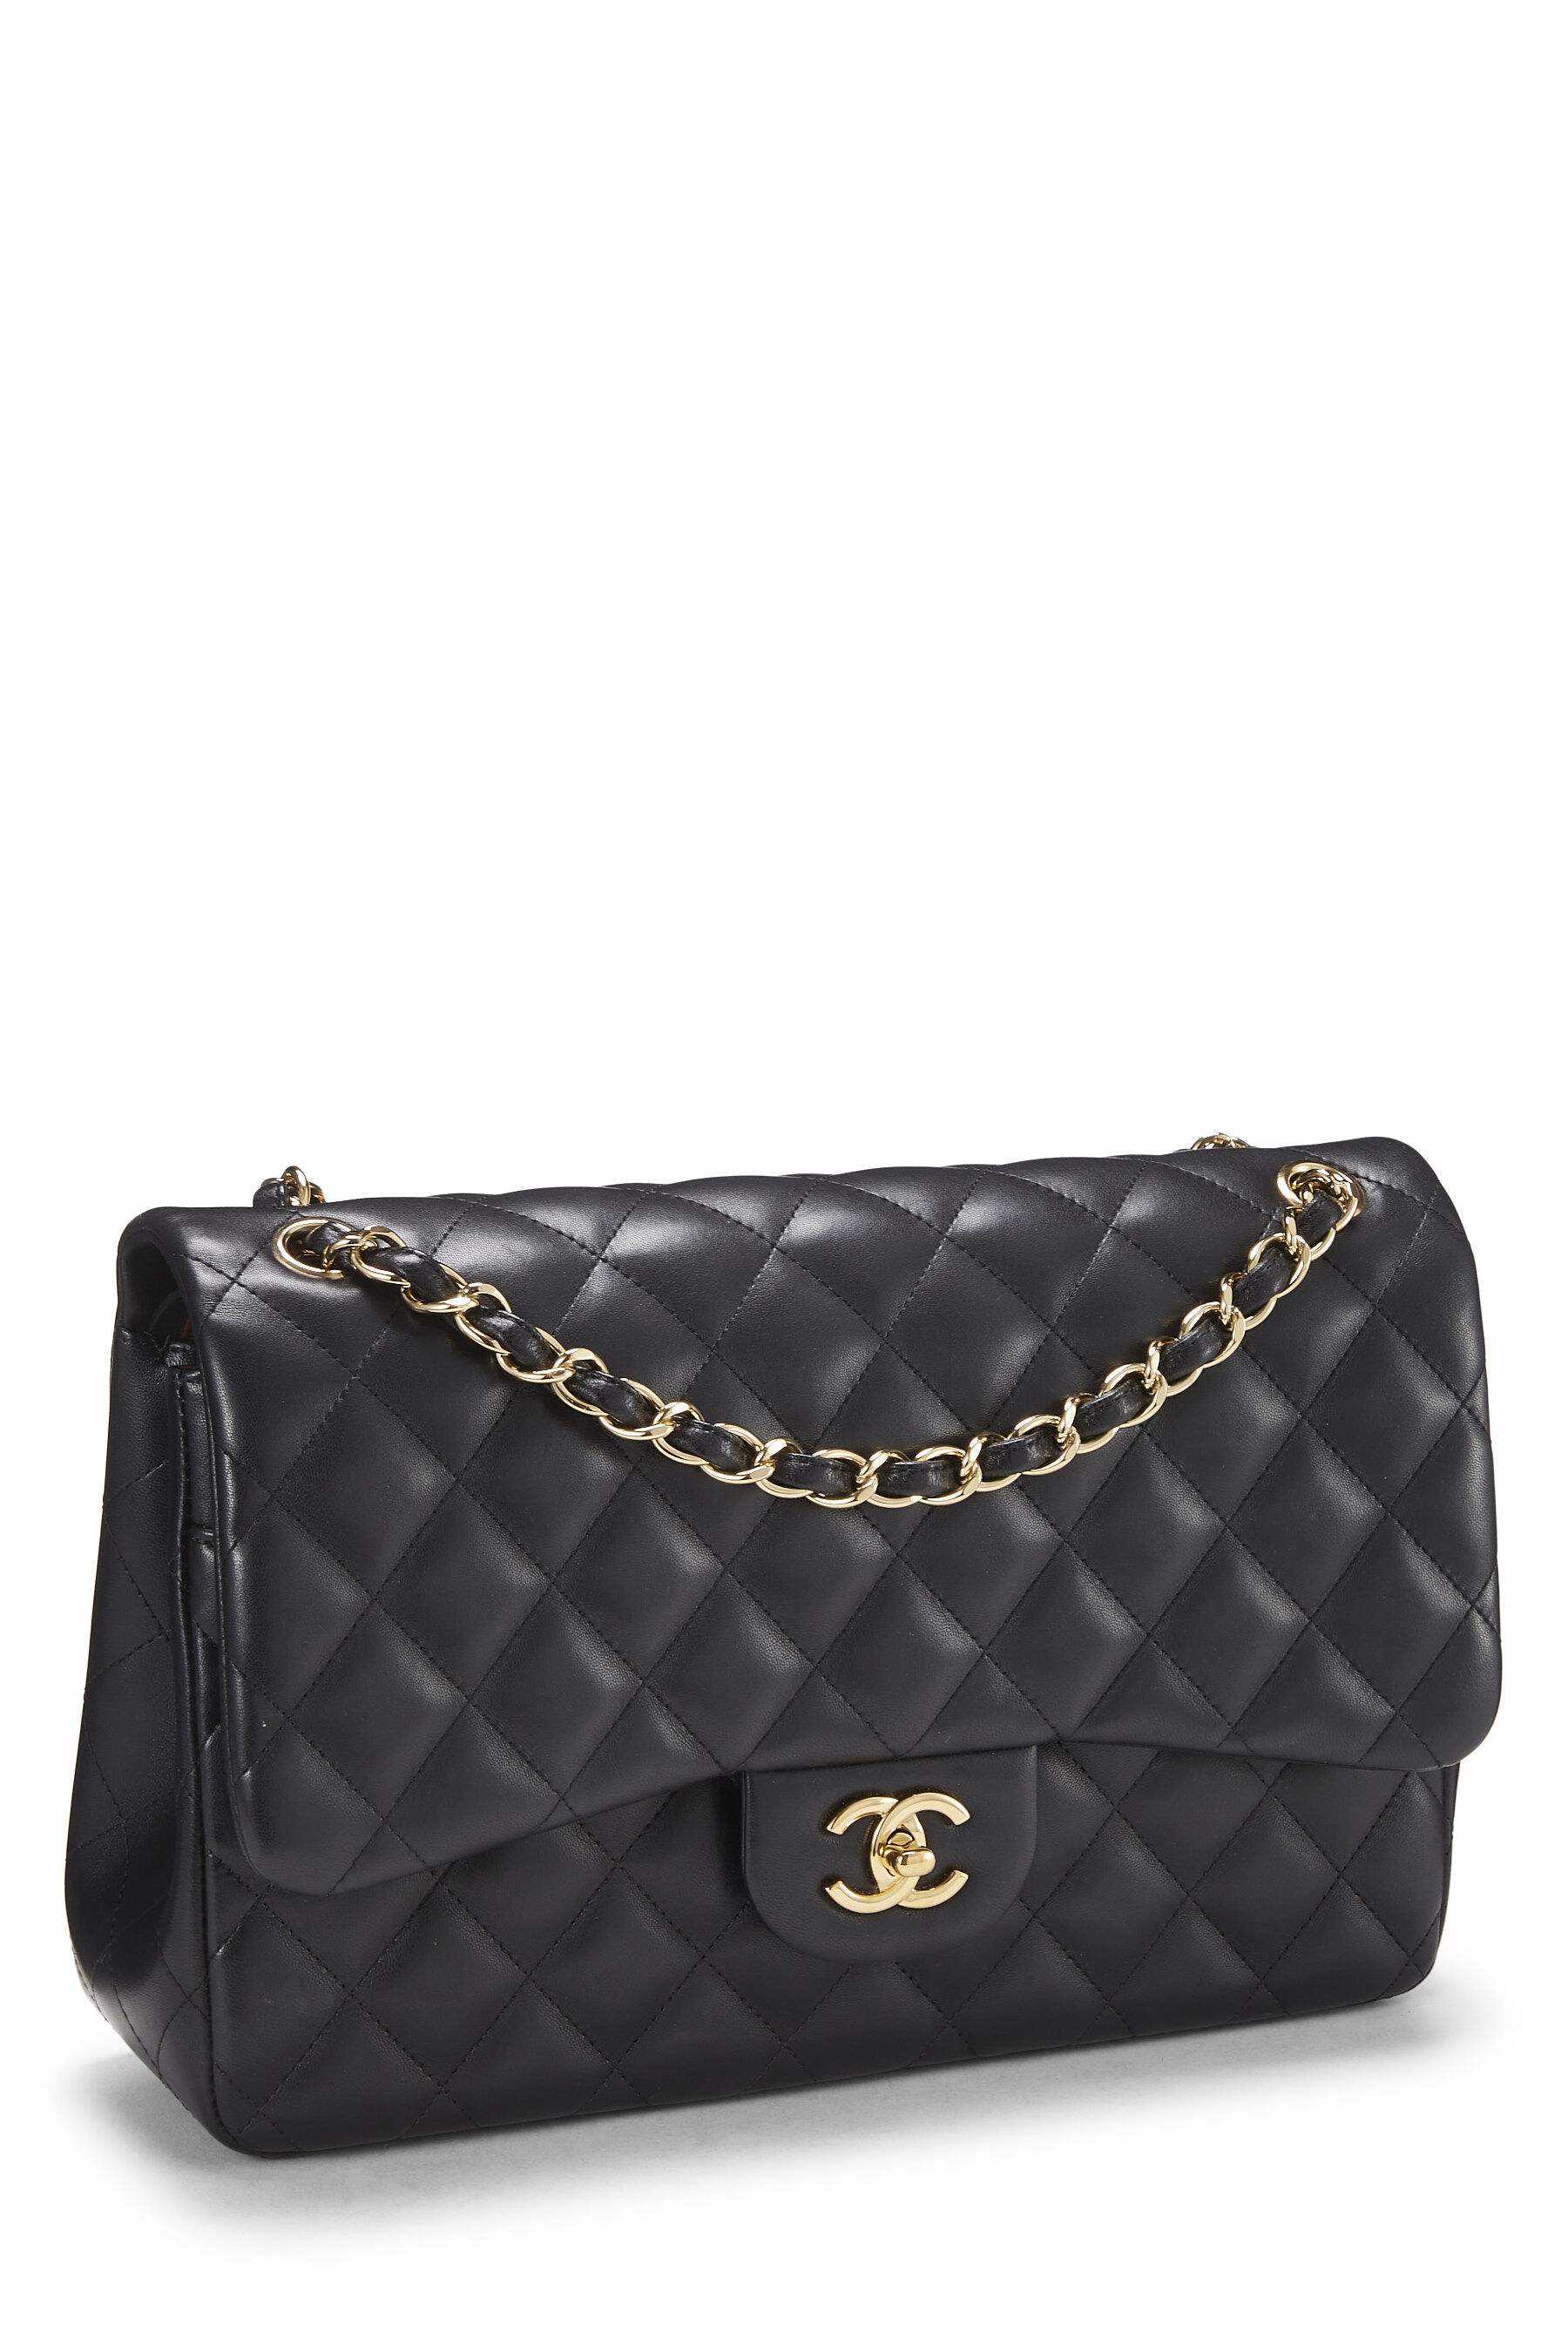 Chanel Black Caviar Double Flap Purse has Chanel / Made in Italy (not  France) real? | Antiques Board